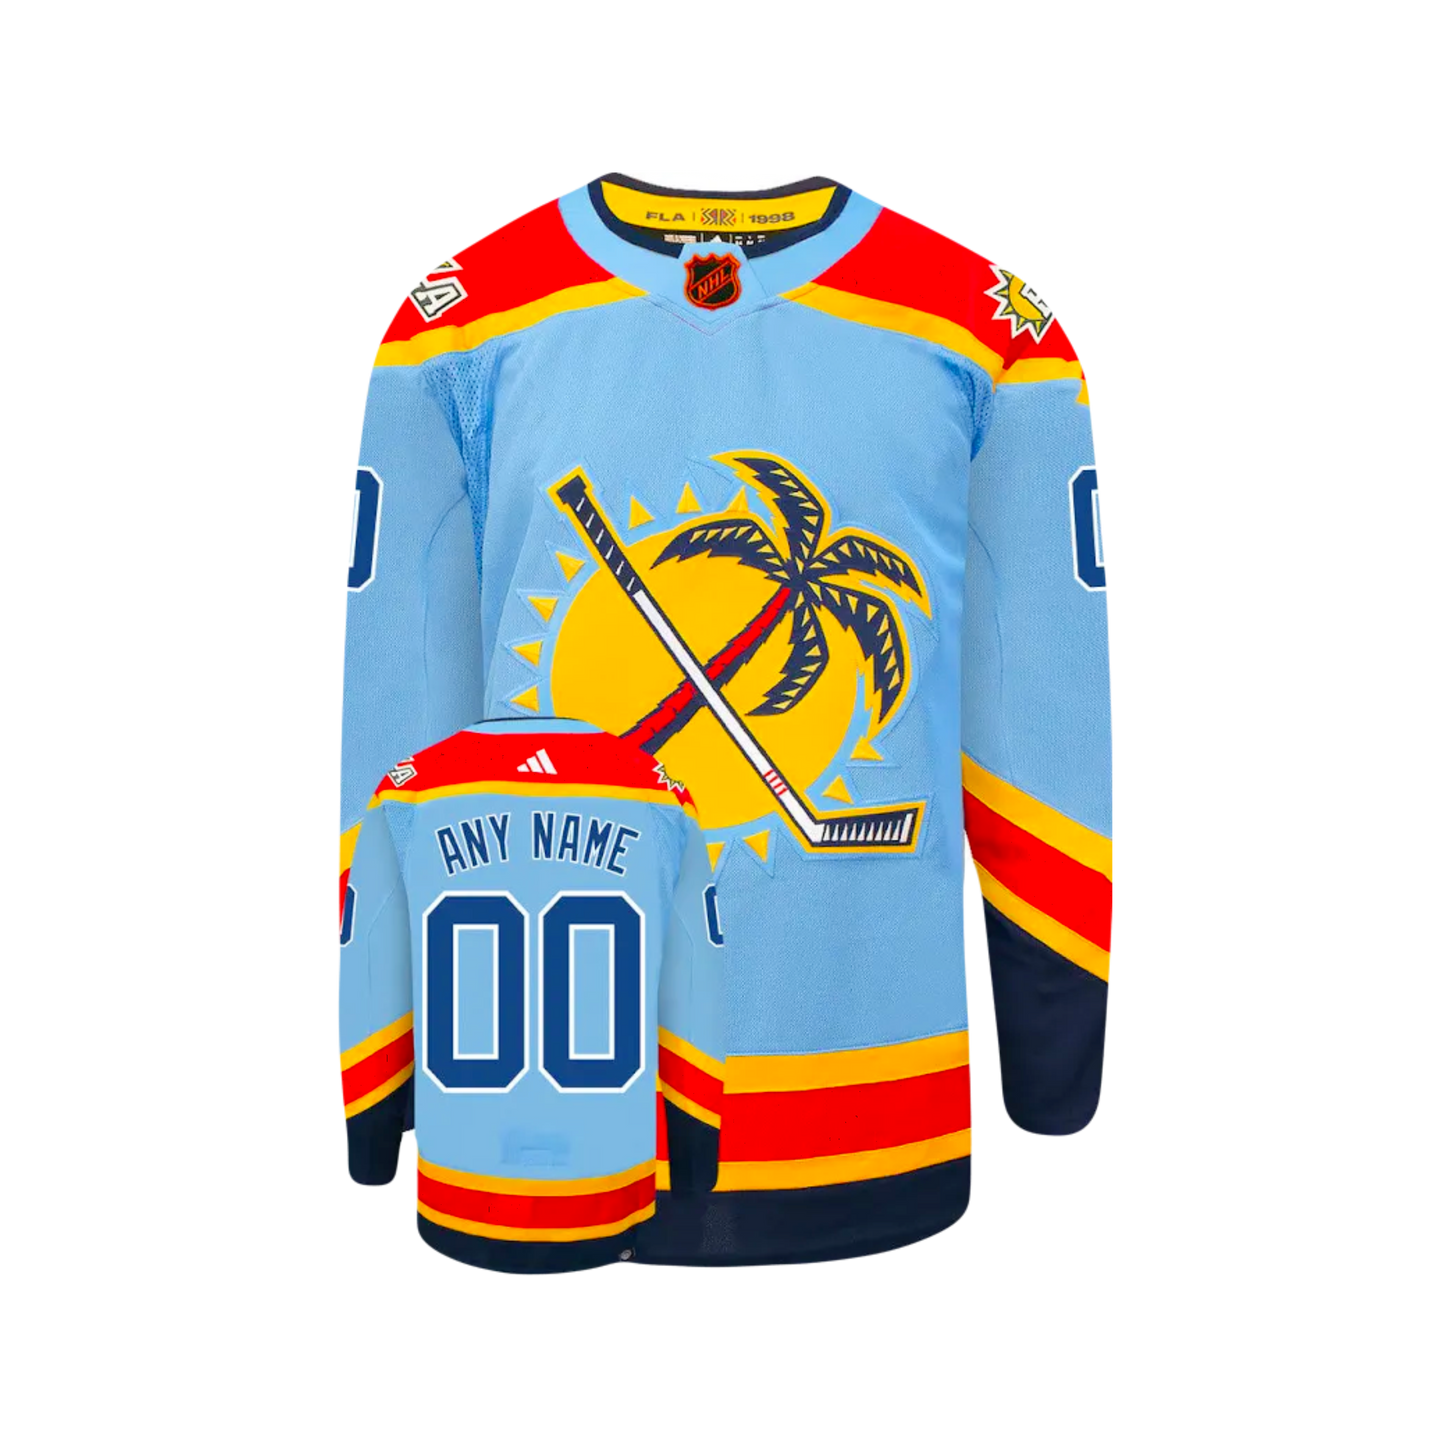 CUSTOM Florida Panthers NHL Authentic Adidas Reverse Retro 2.0 Premier Player Jersey - Baby Blue (Any Name)